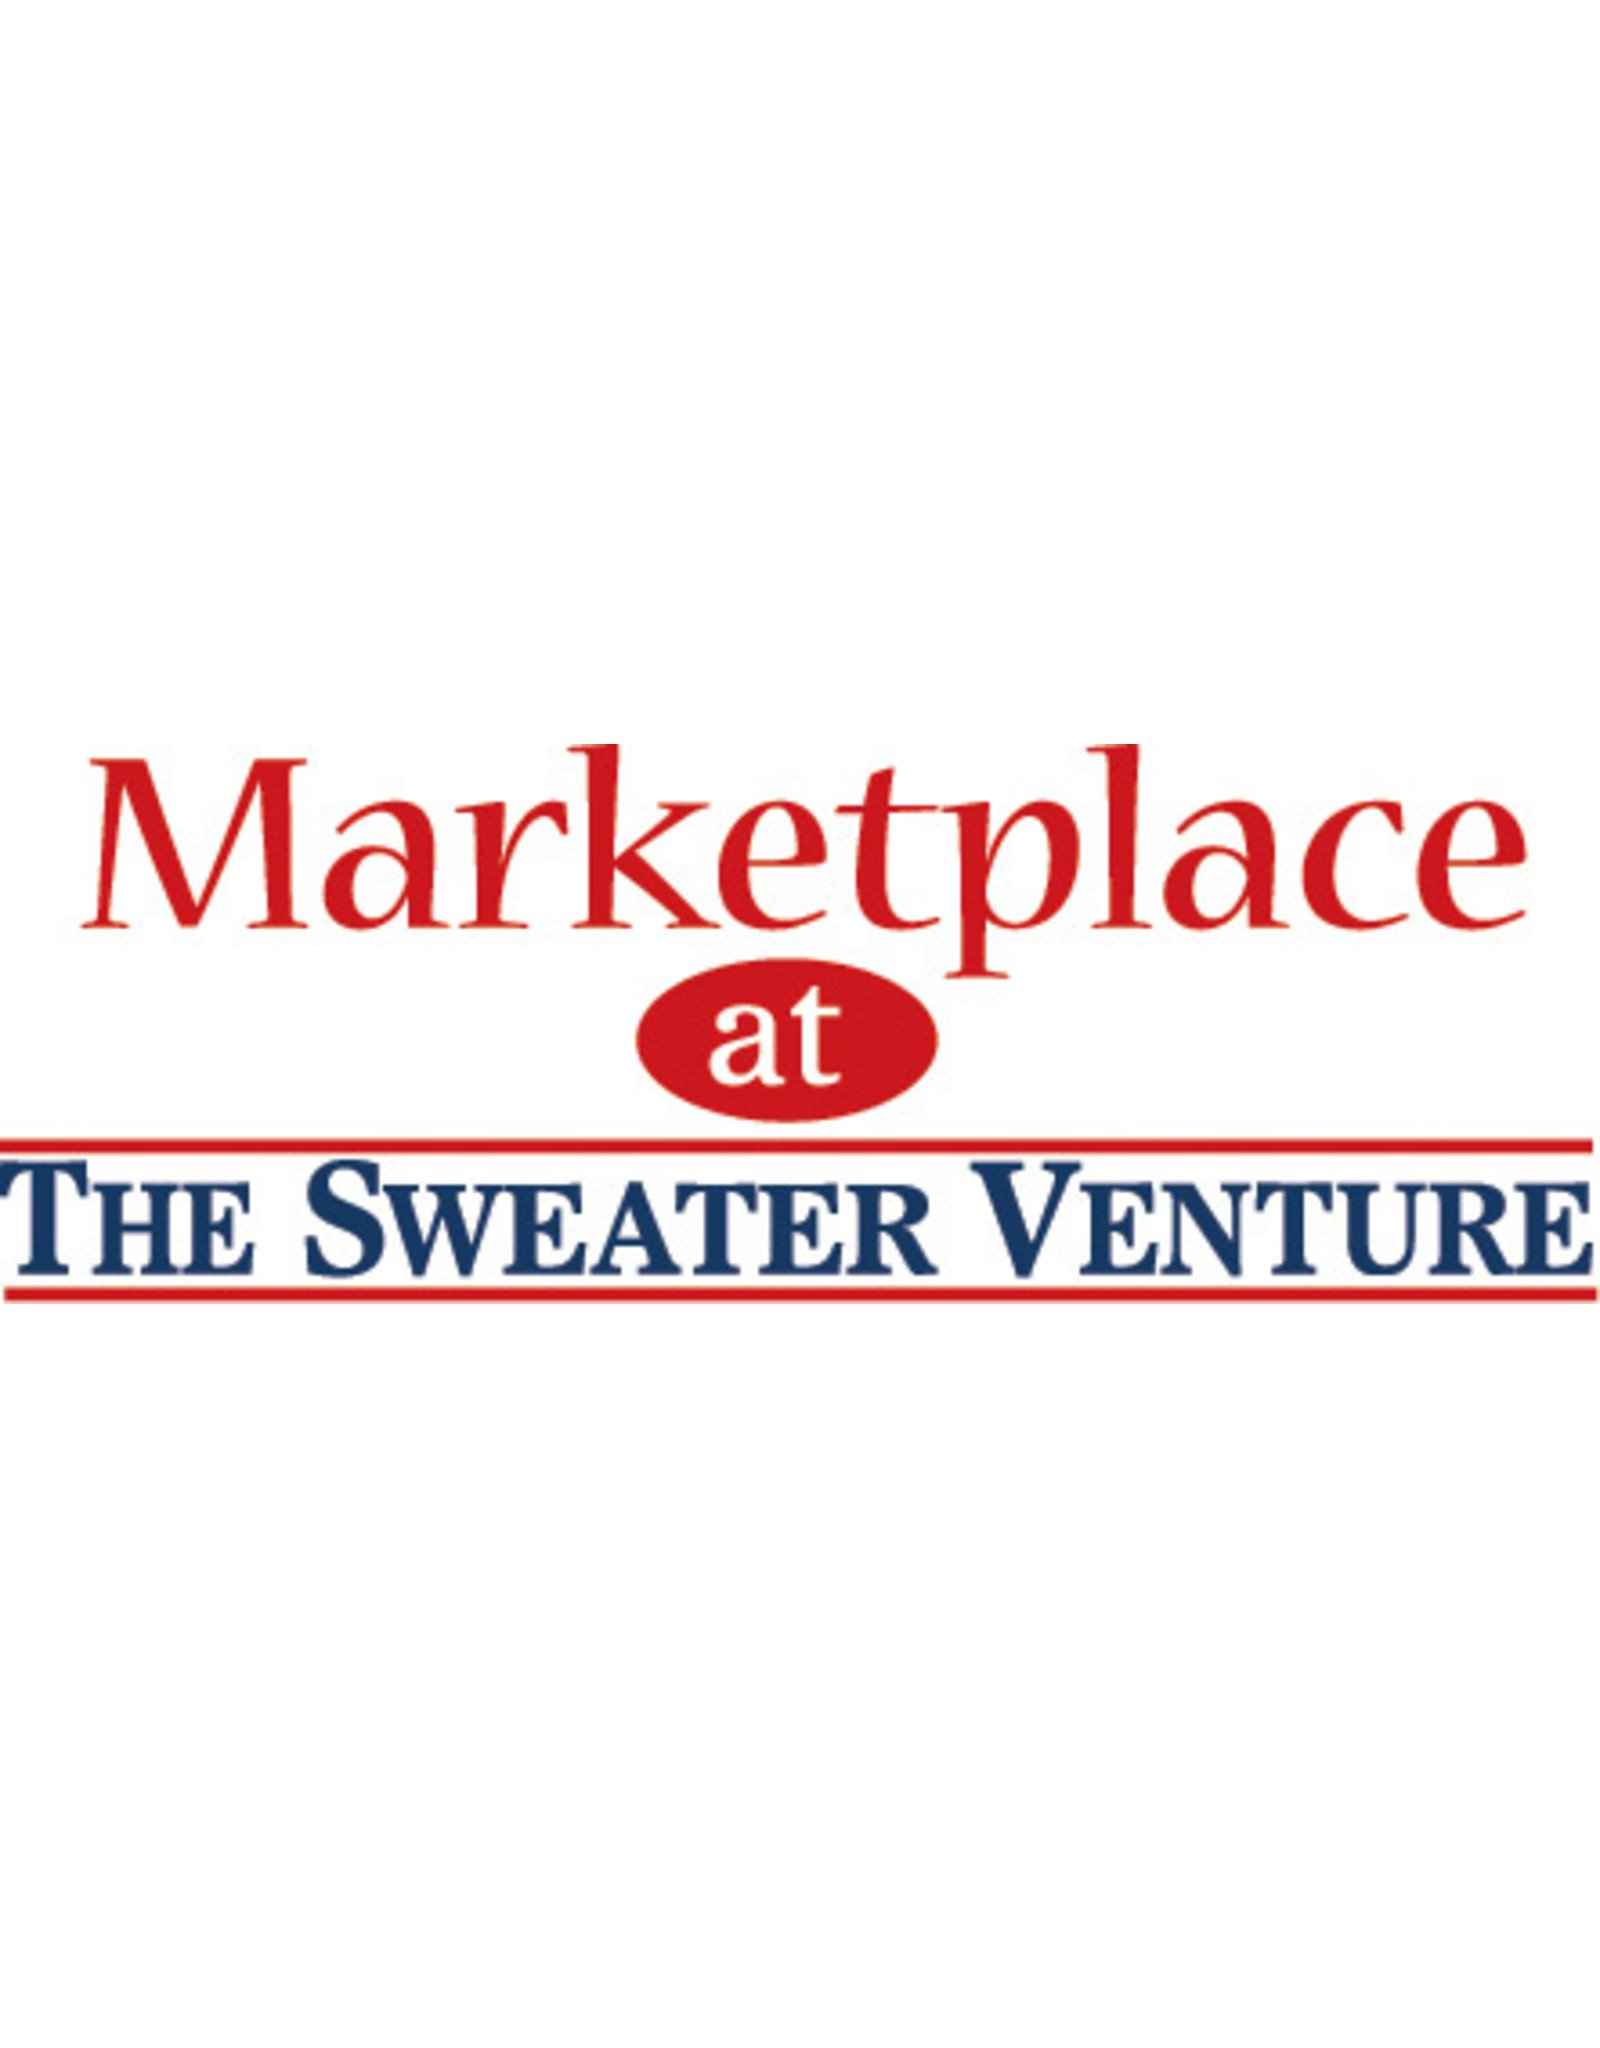 The Sweater Venture $25.00 Website gift card